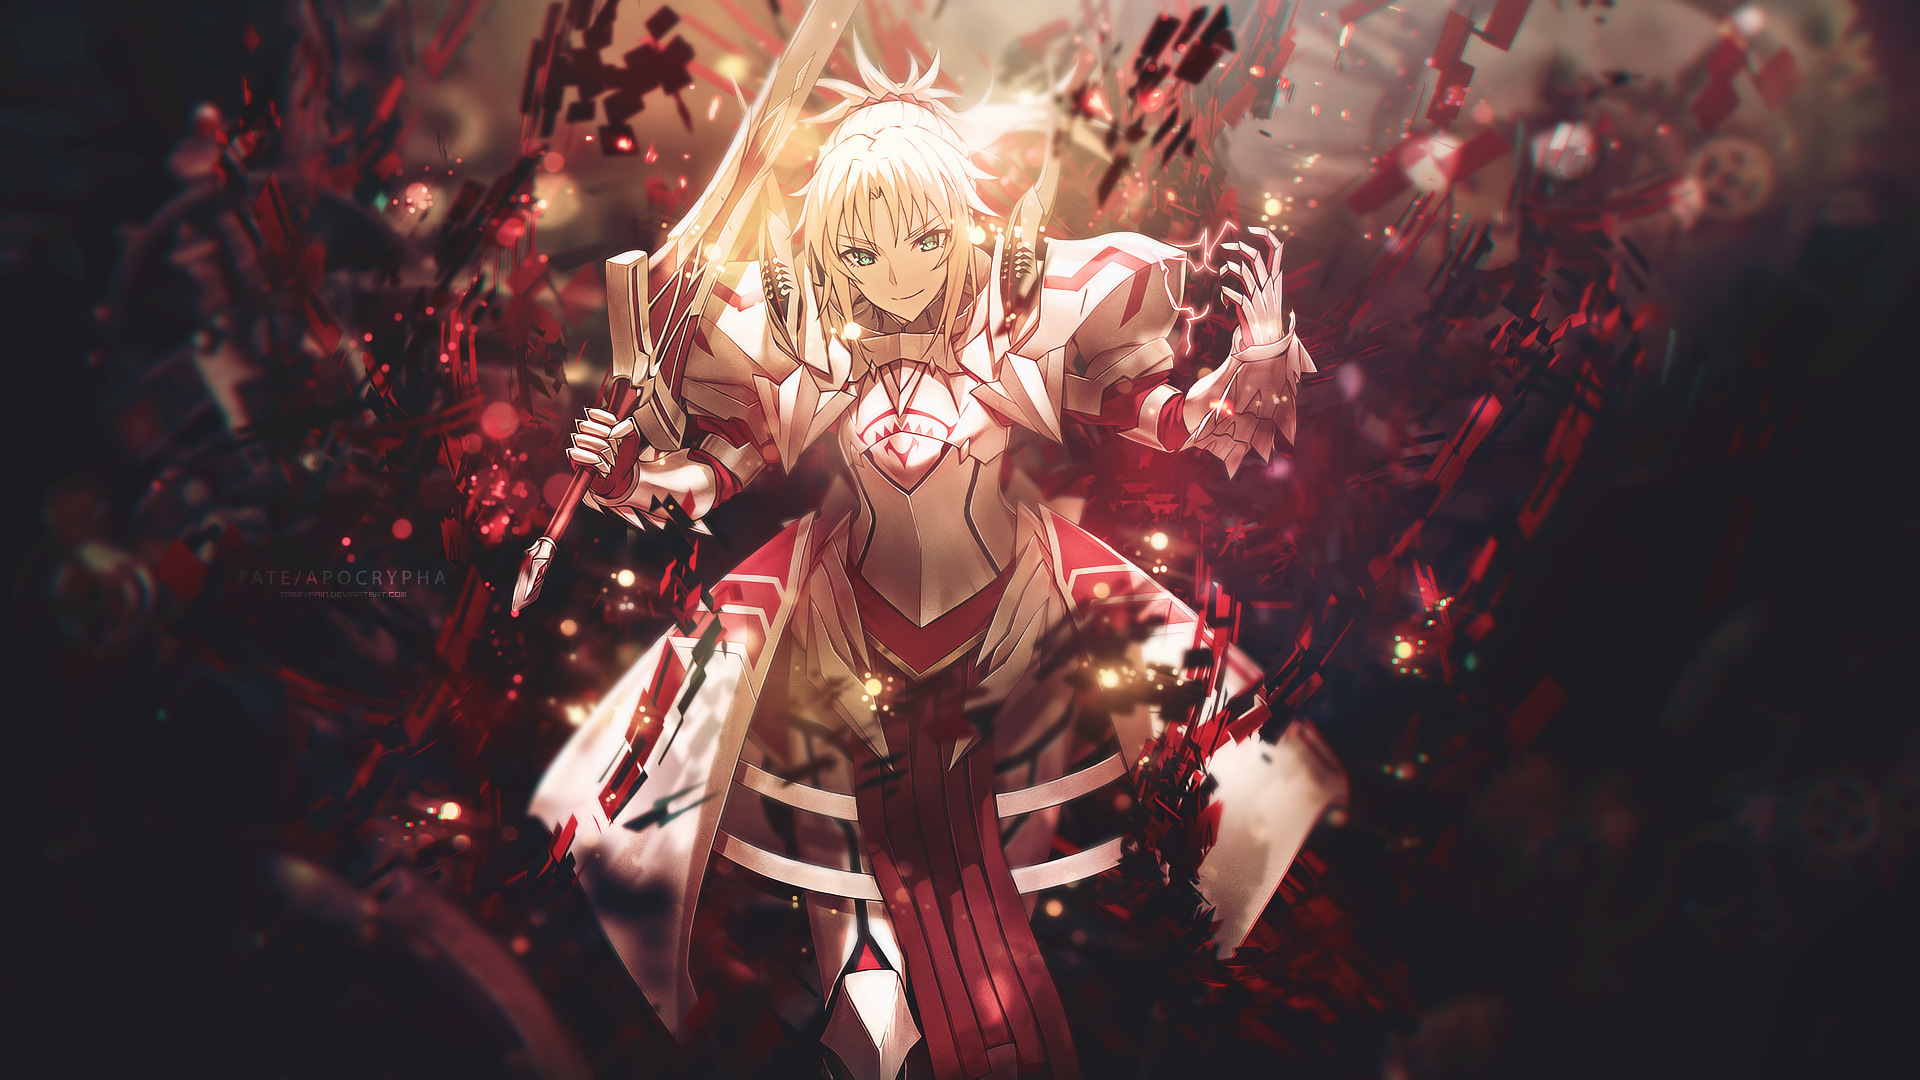 585 Fate Apocrypha Hd Wallpapers Background Images Wallpaper Abyss